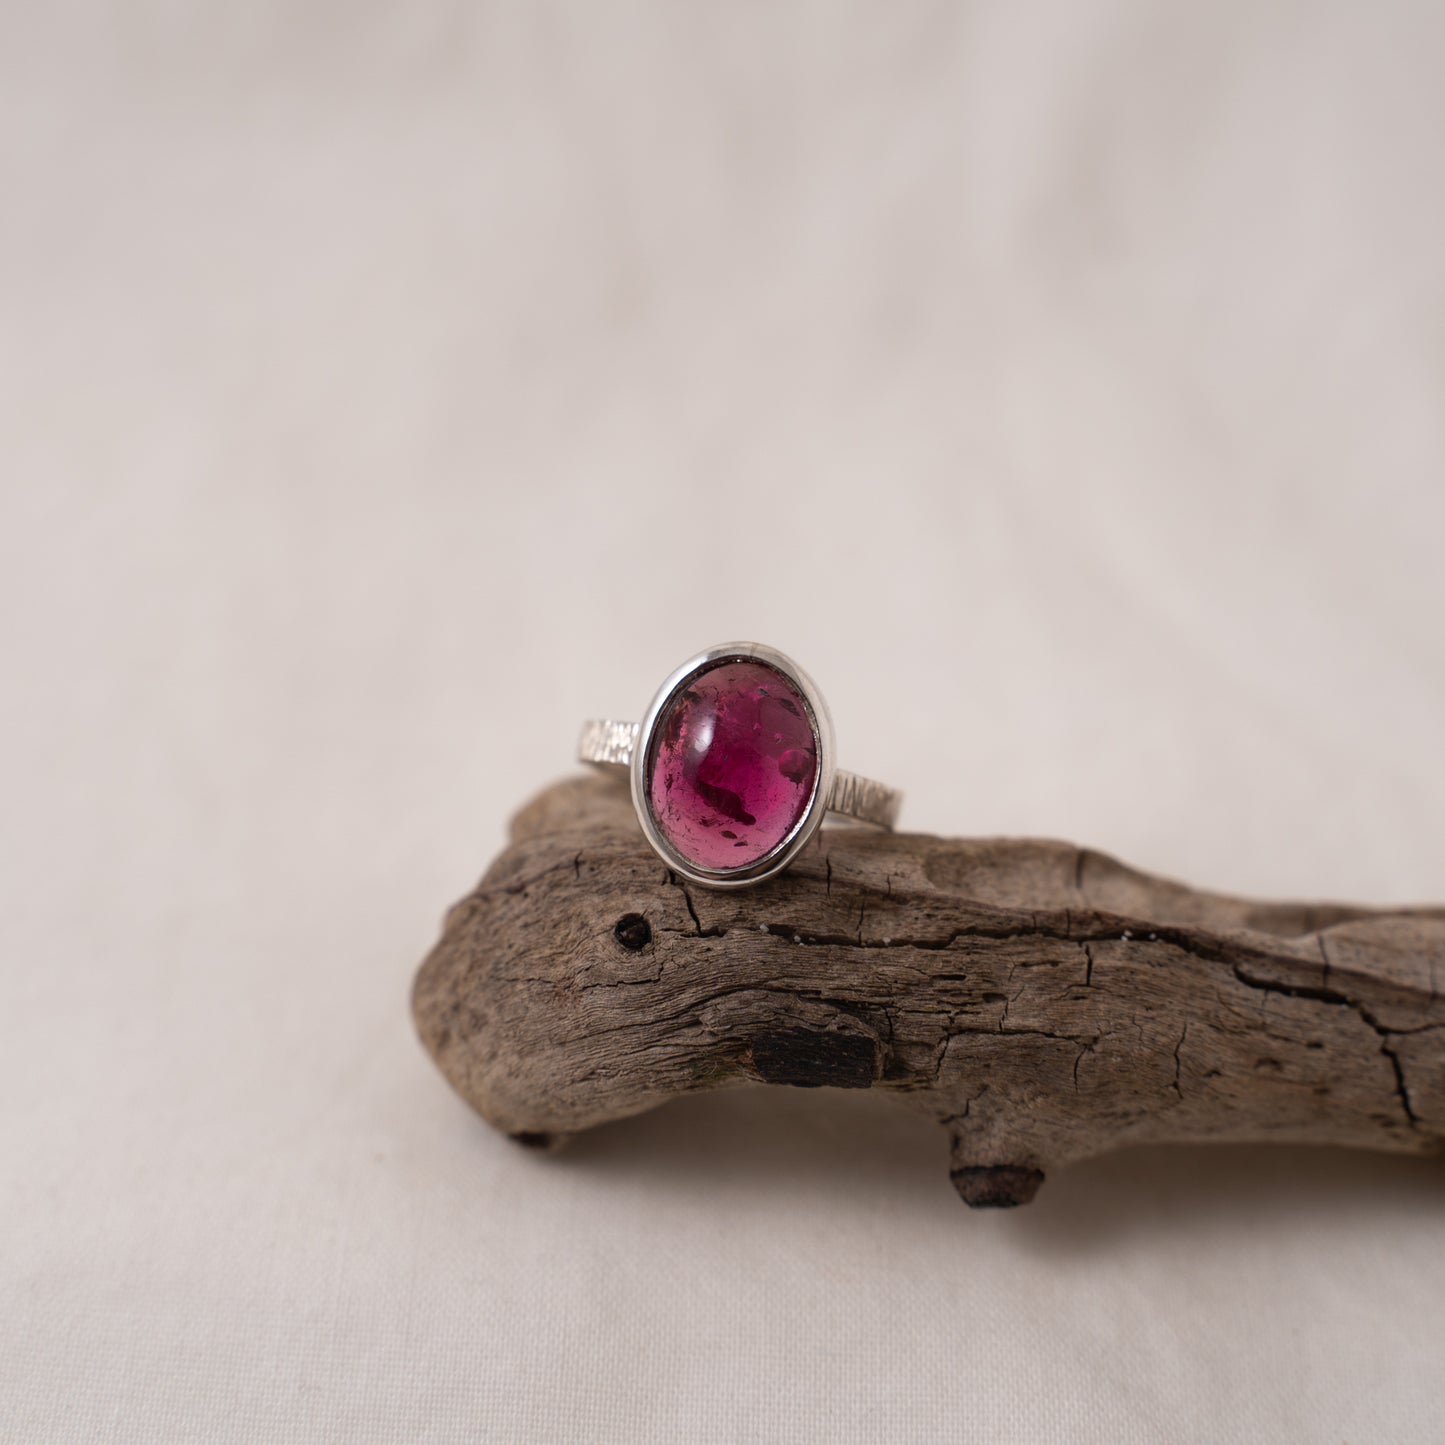 Oval pink tourmaline cabochon silver textured ring